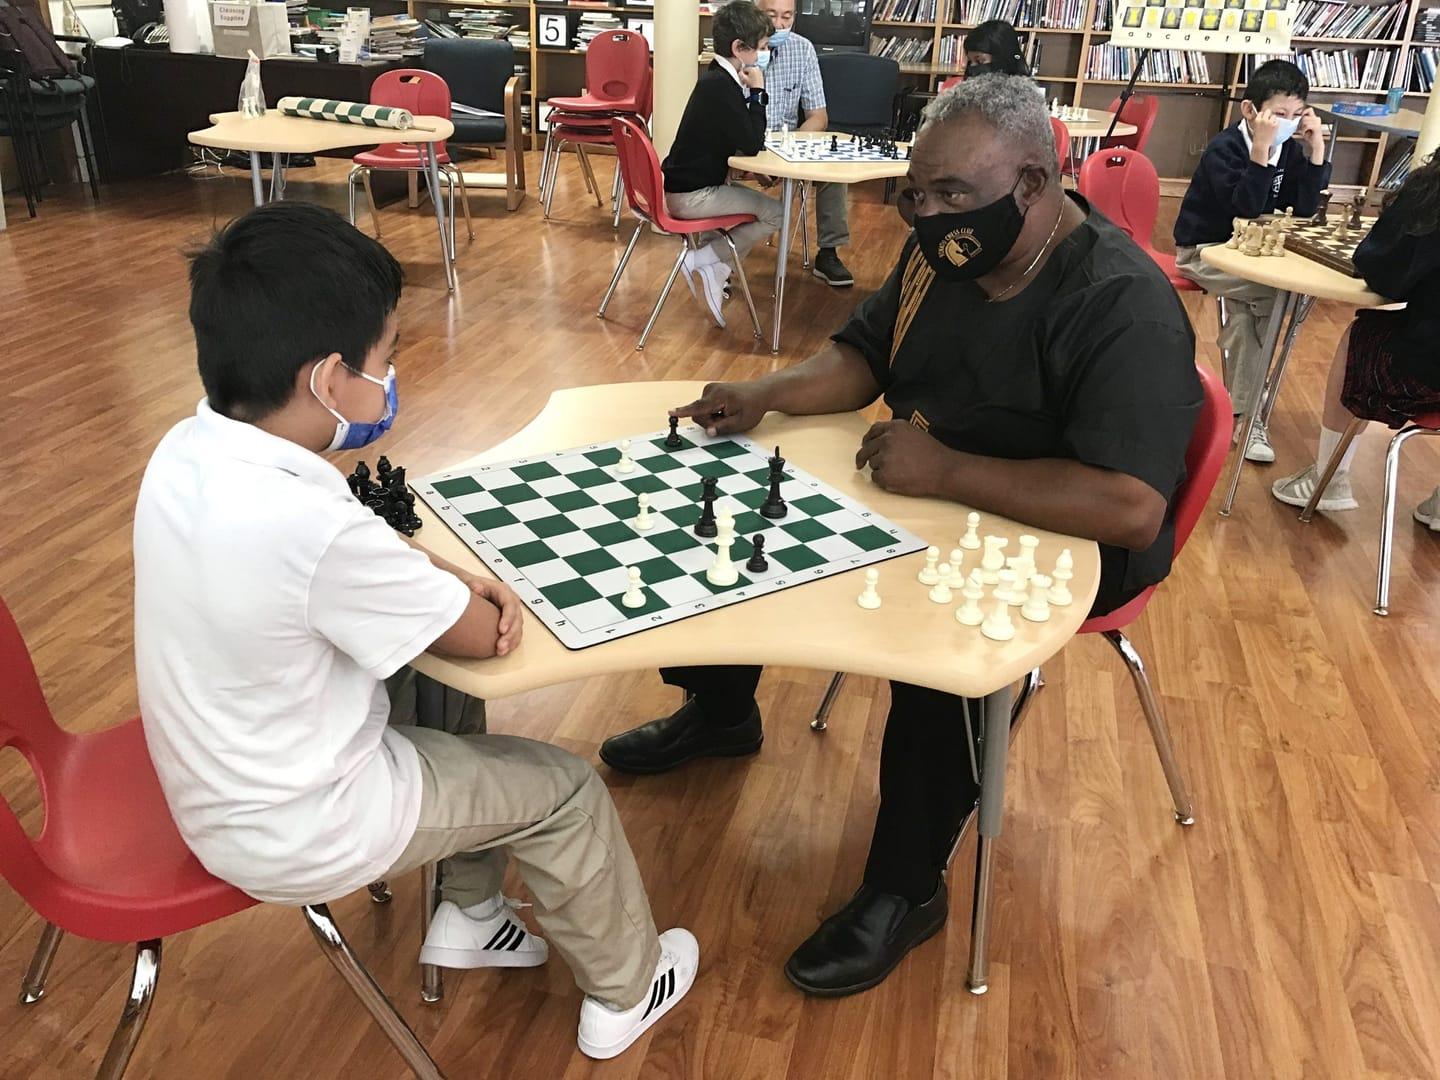 Game of chess helps Catholic school students discern their next move